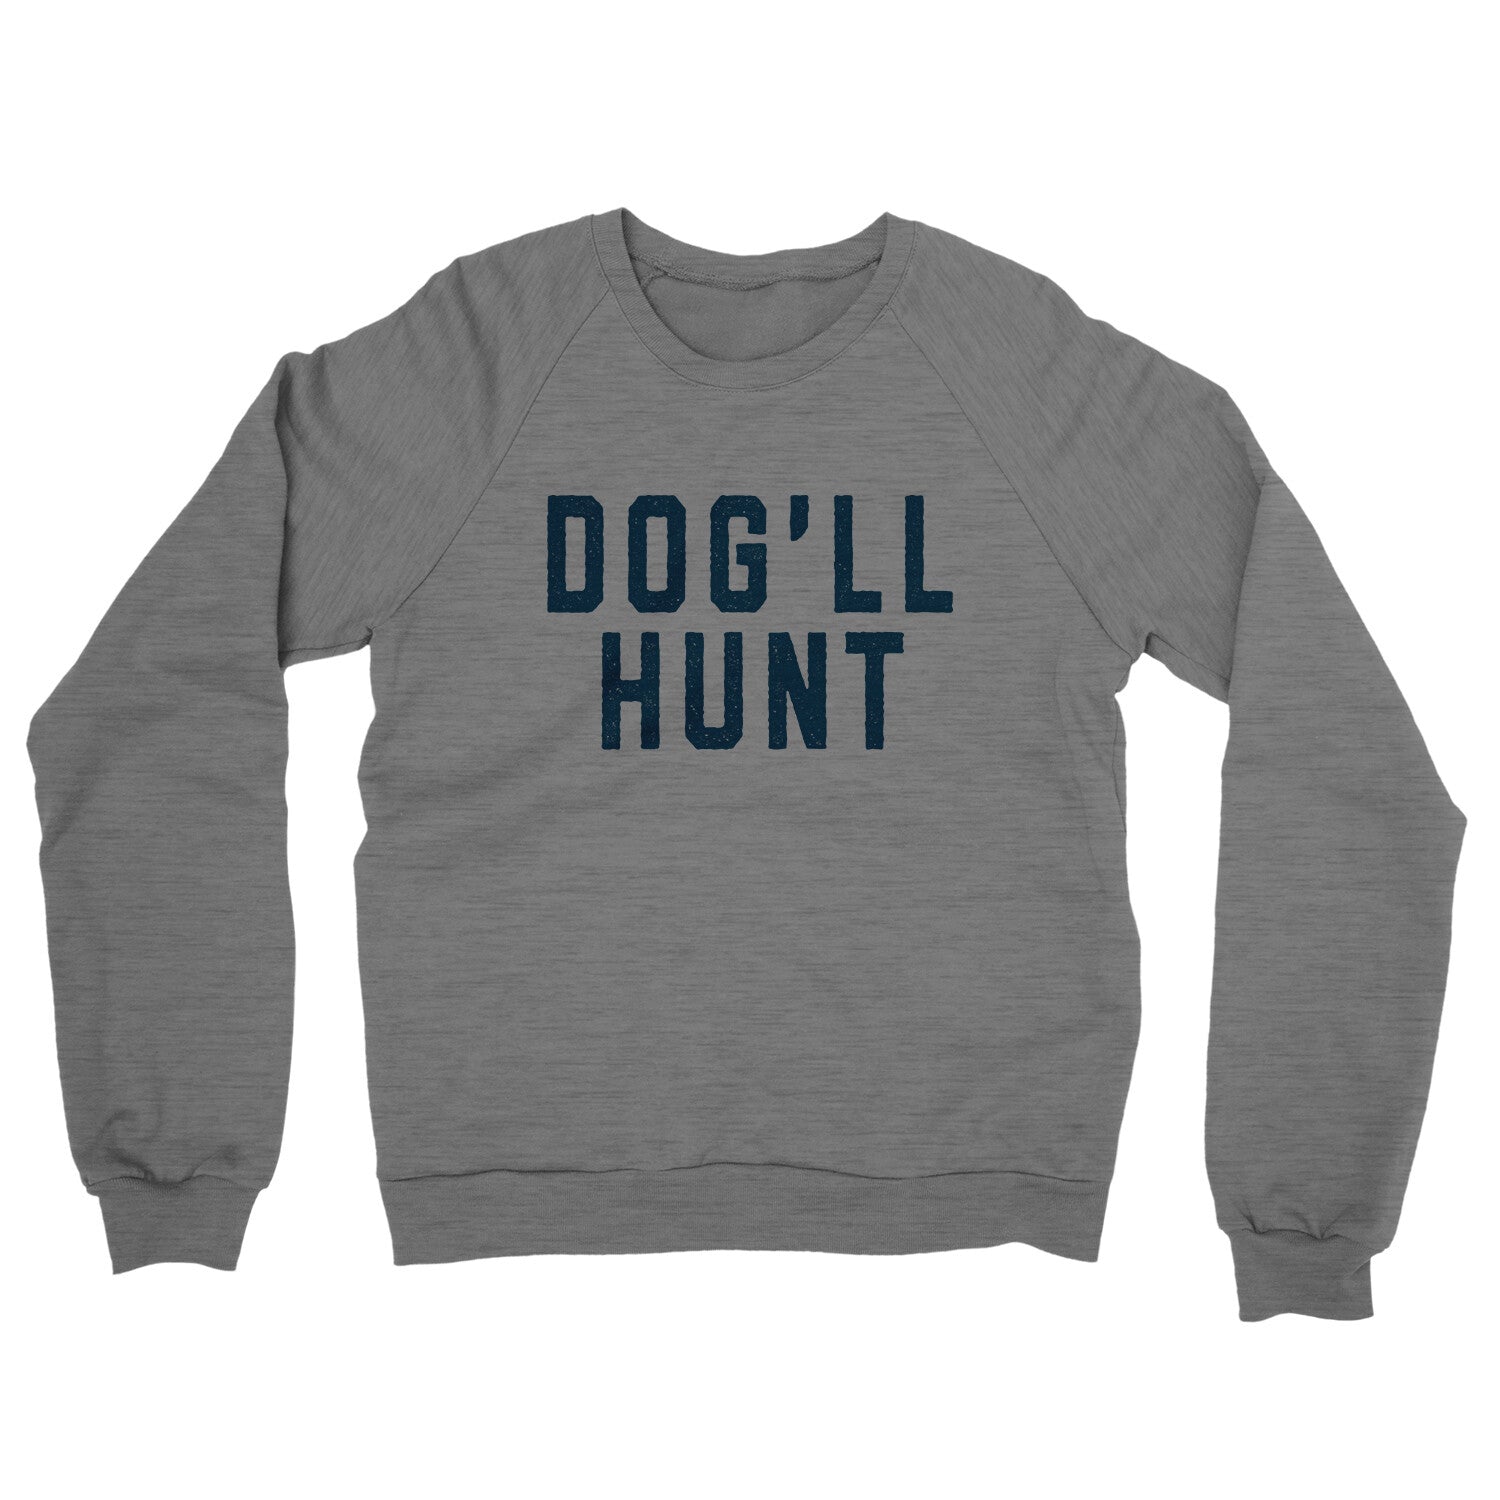 Dog’ll Hunt in Graphite Heather Color